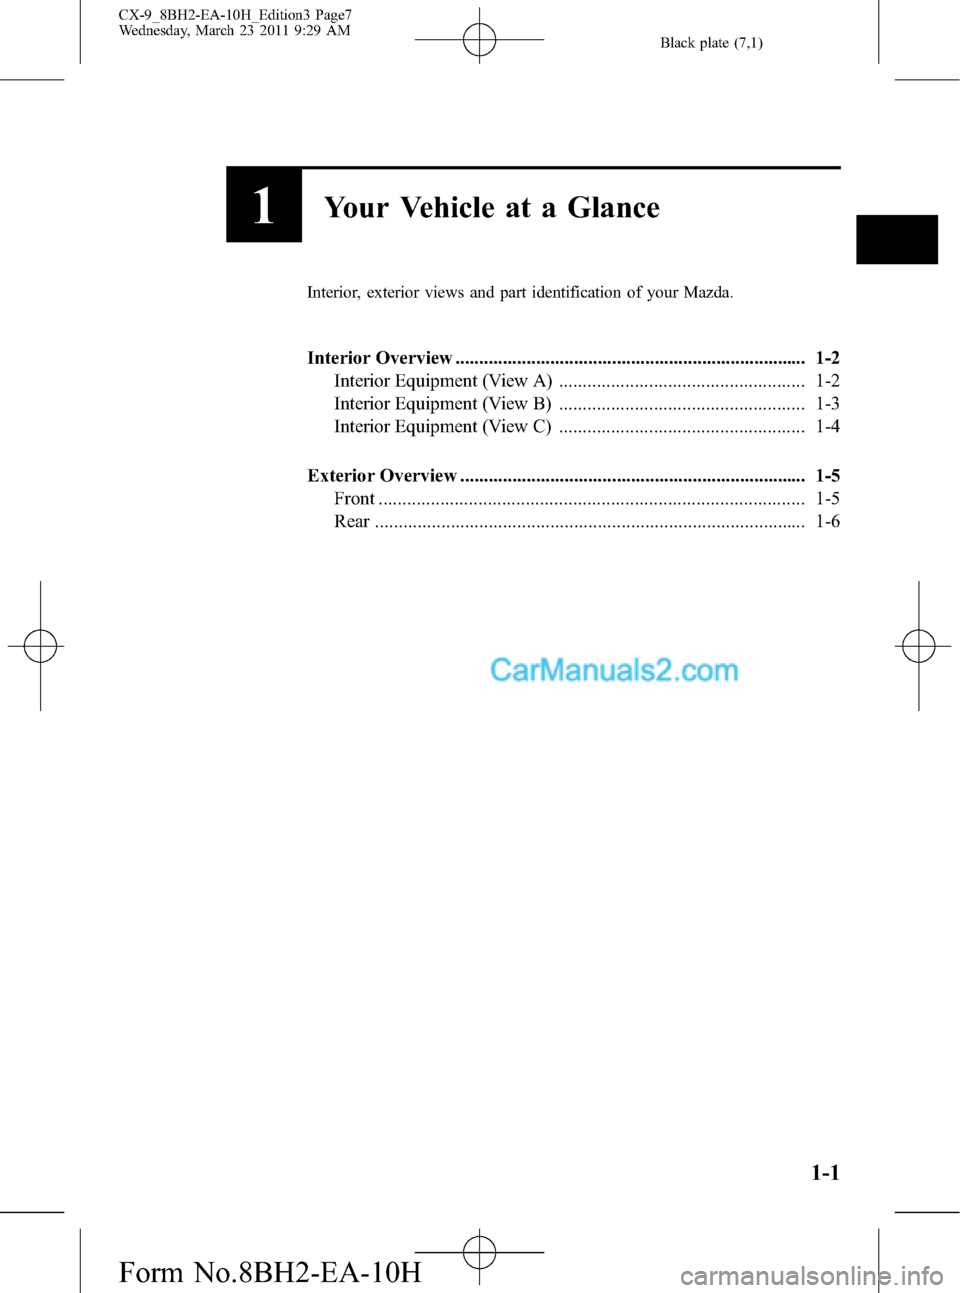 MAZDA MODEL CX-9 2011  Owners Manual (in English) Black plate (7,1)
1Your Vehicle at a Glance
Interior, exterior views and part identification of your Mazda.
Interior Overview ..........................................................................